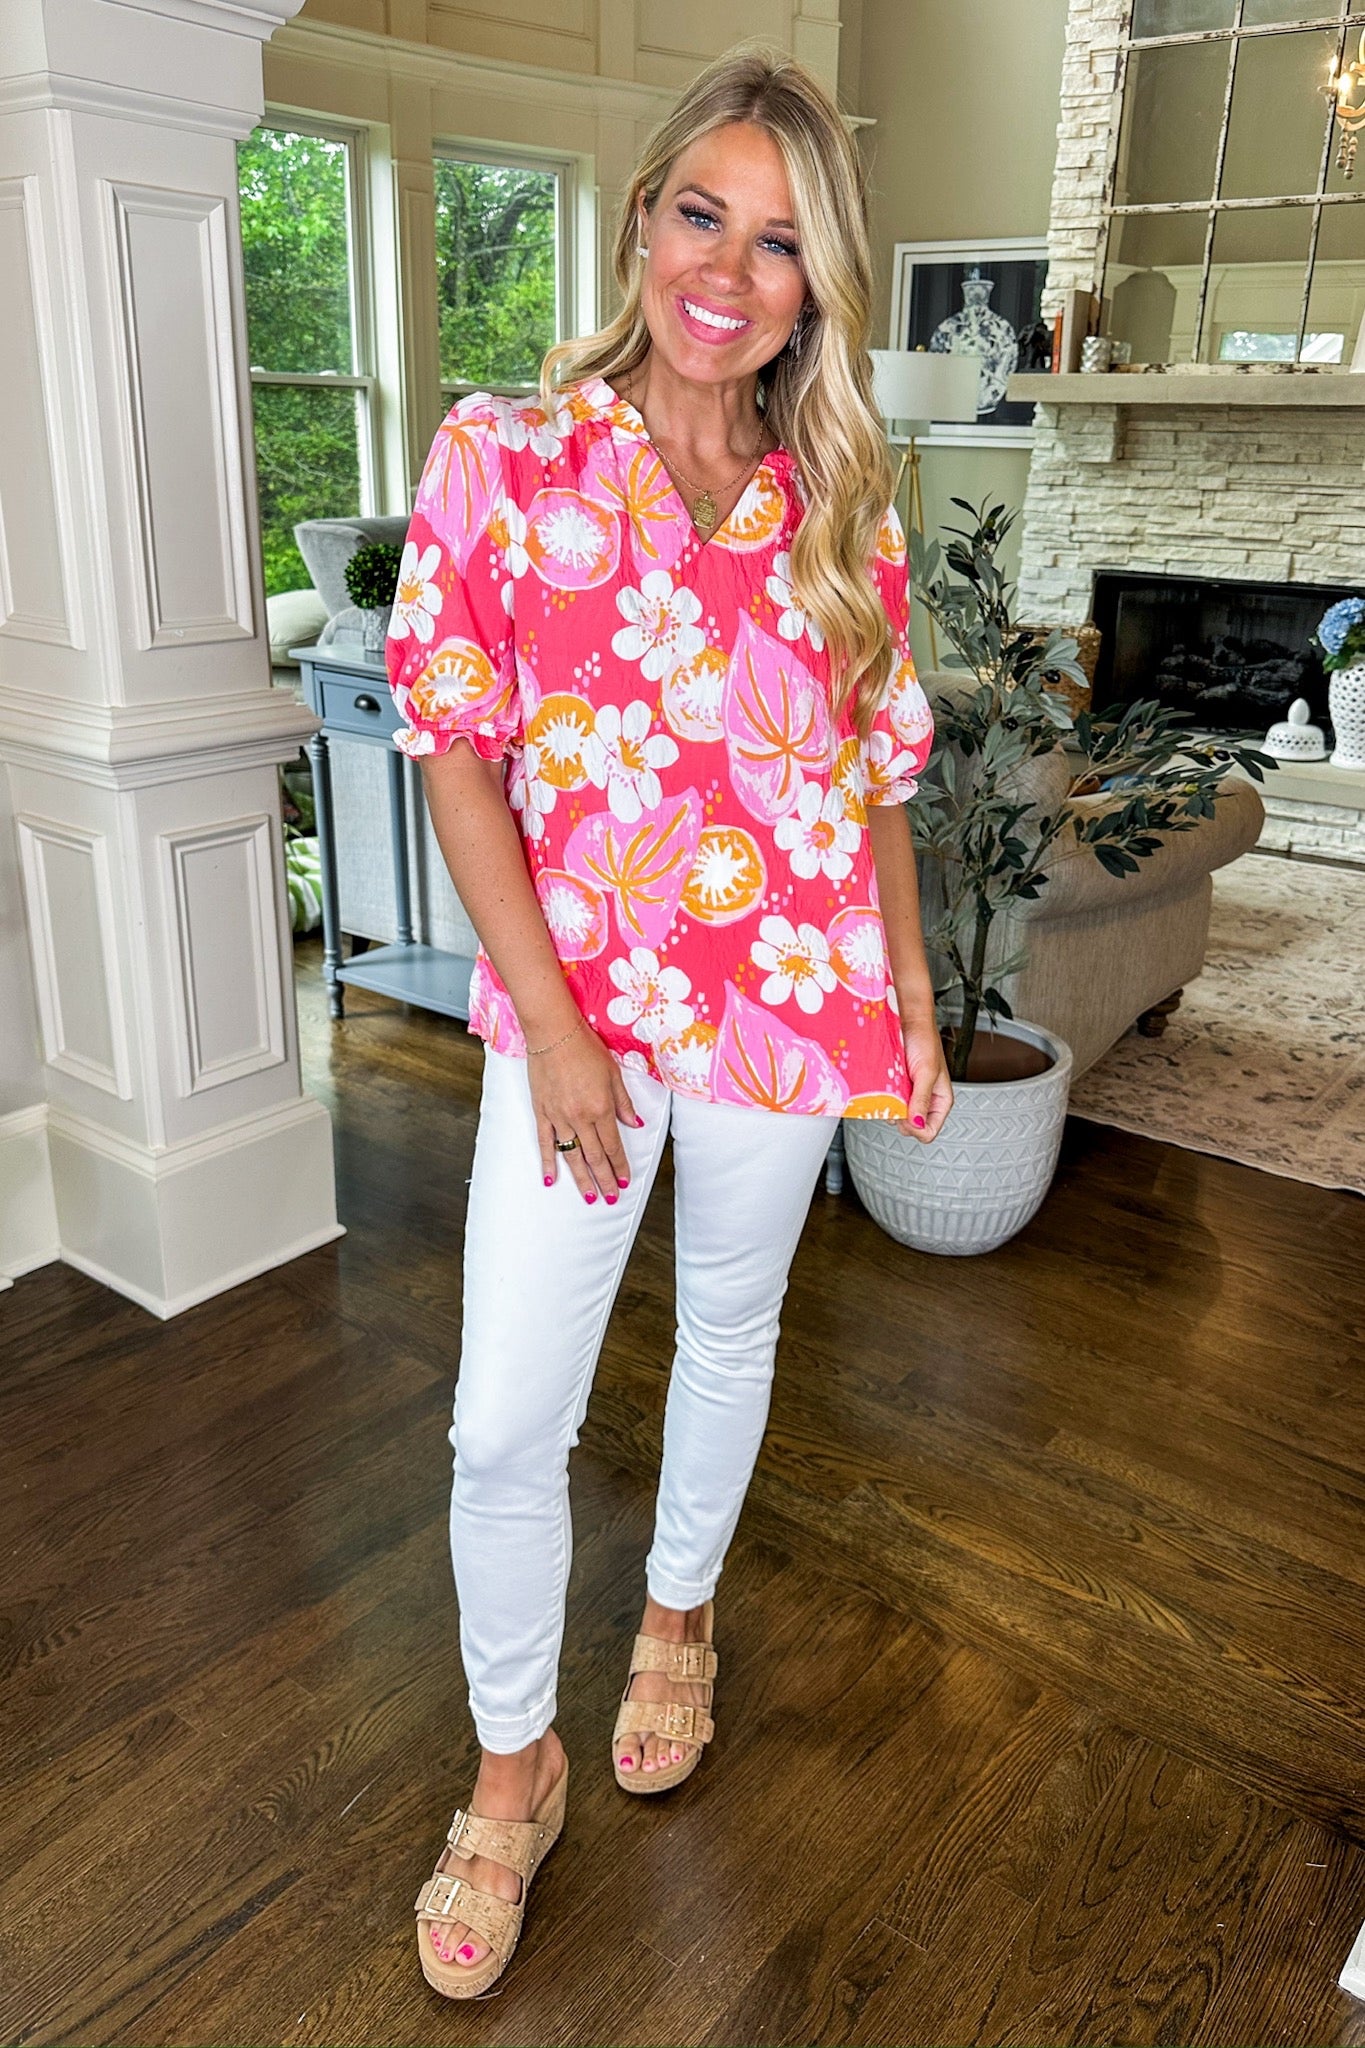 The Malia Kiwi Bloom Coral Top by Michelle McDowell